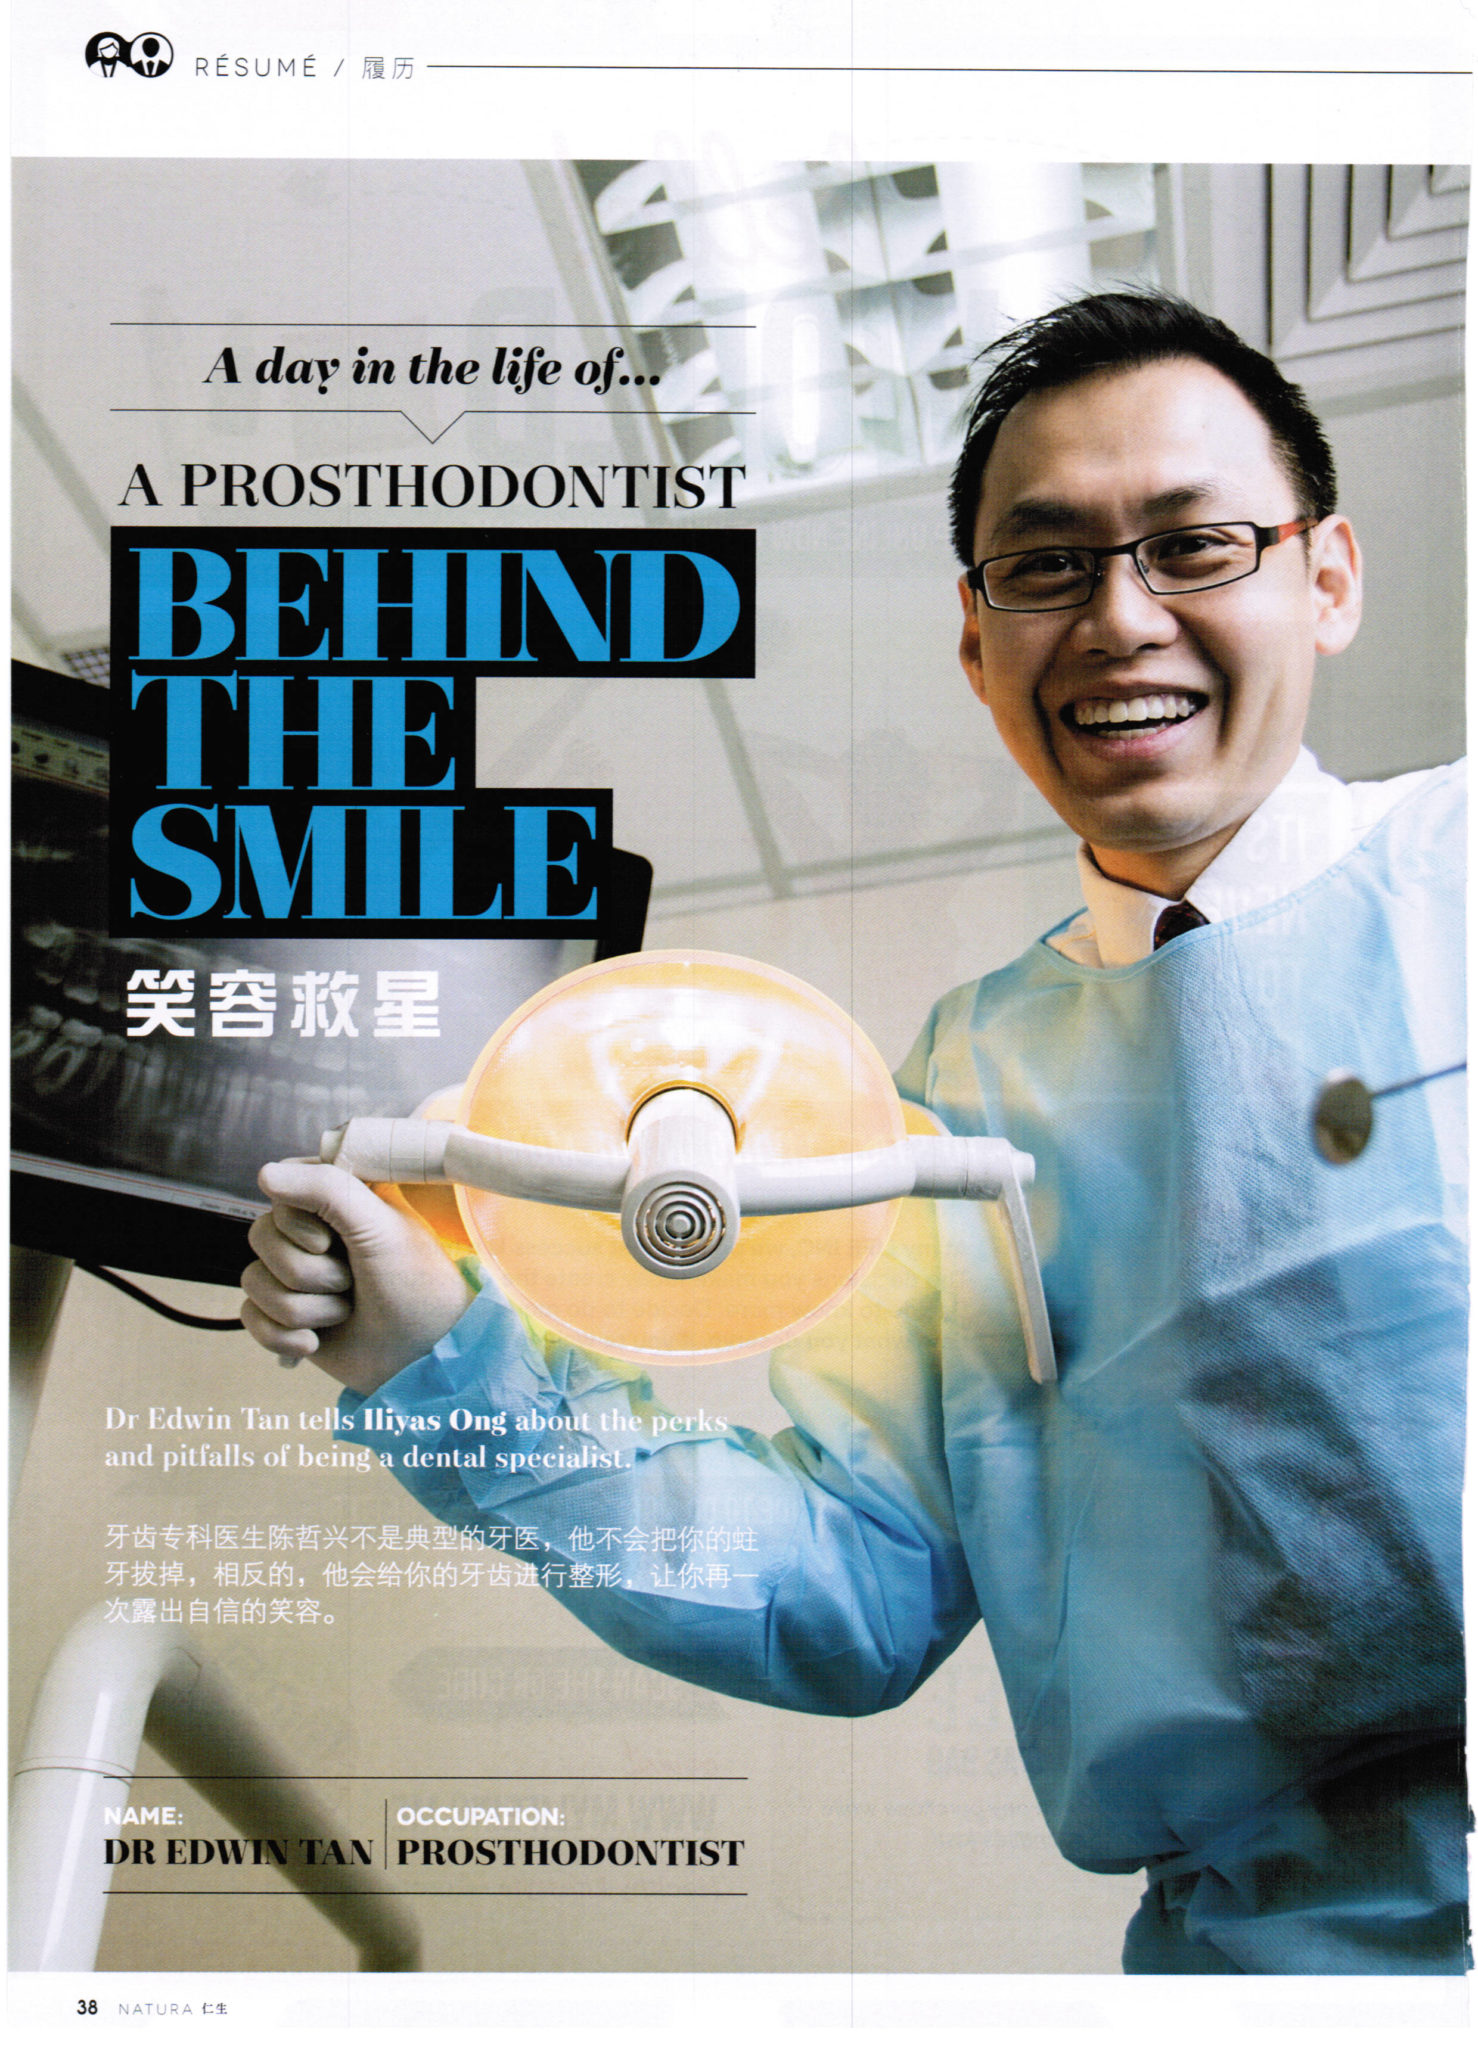 Natura Magazine, March 2014 issue: “A Day In The Life of a Prosthodontist – Behind The Smile”